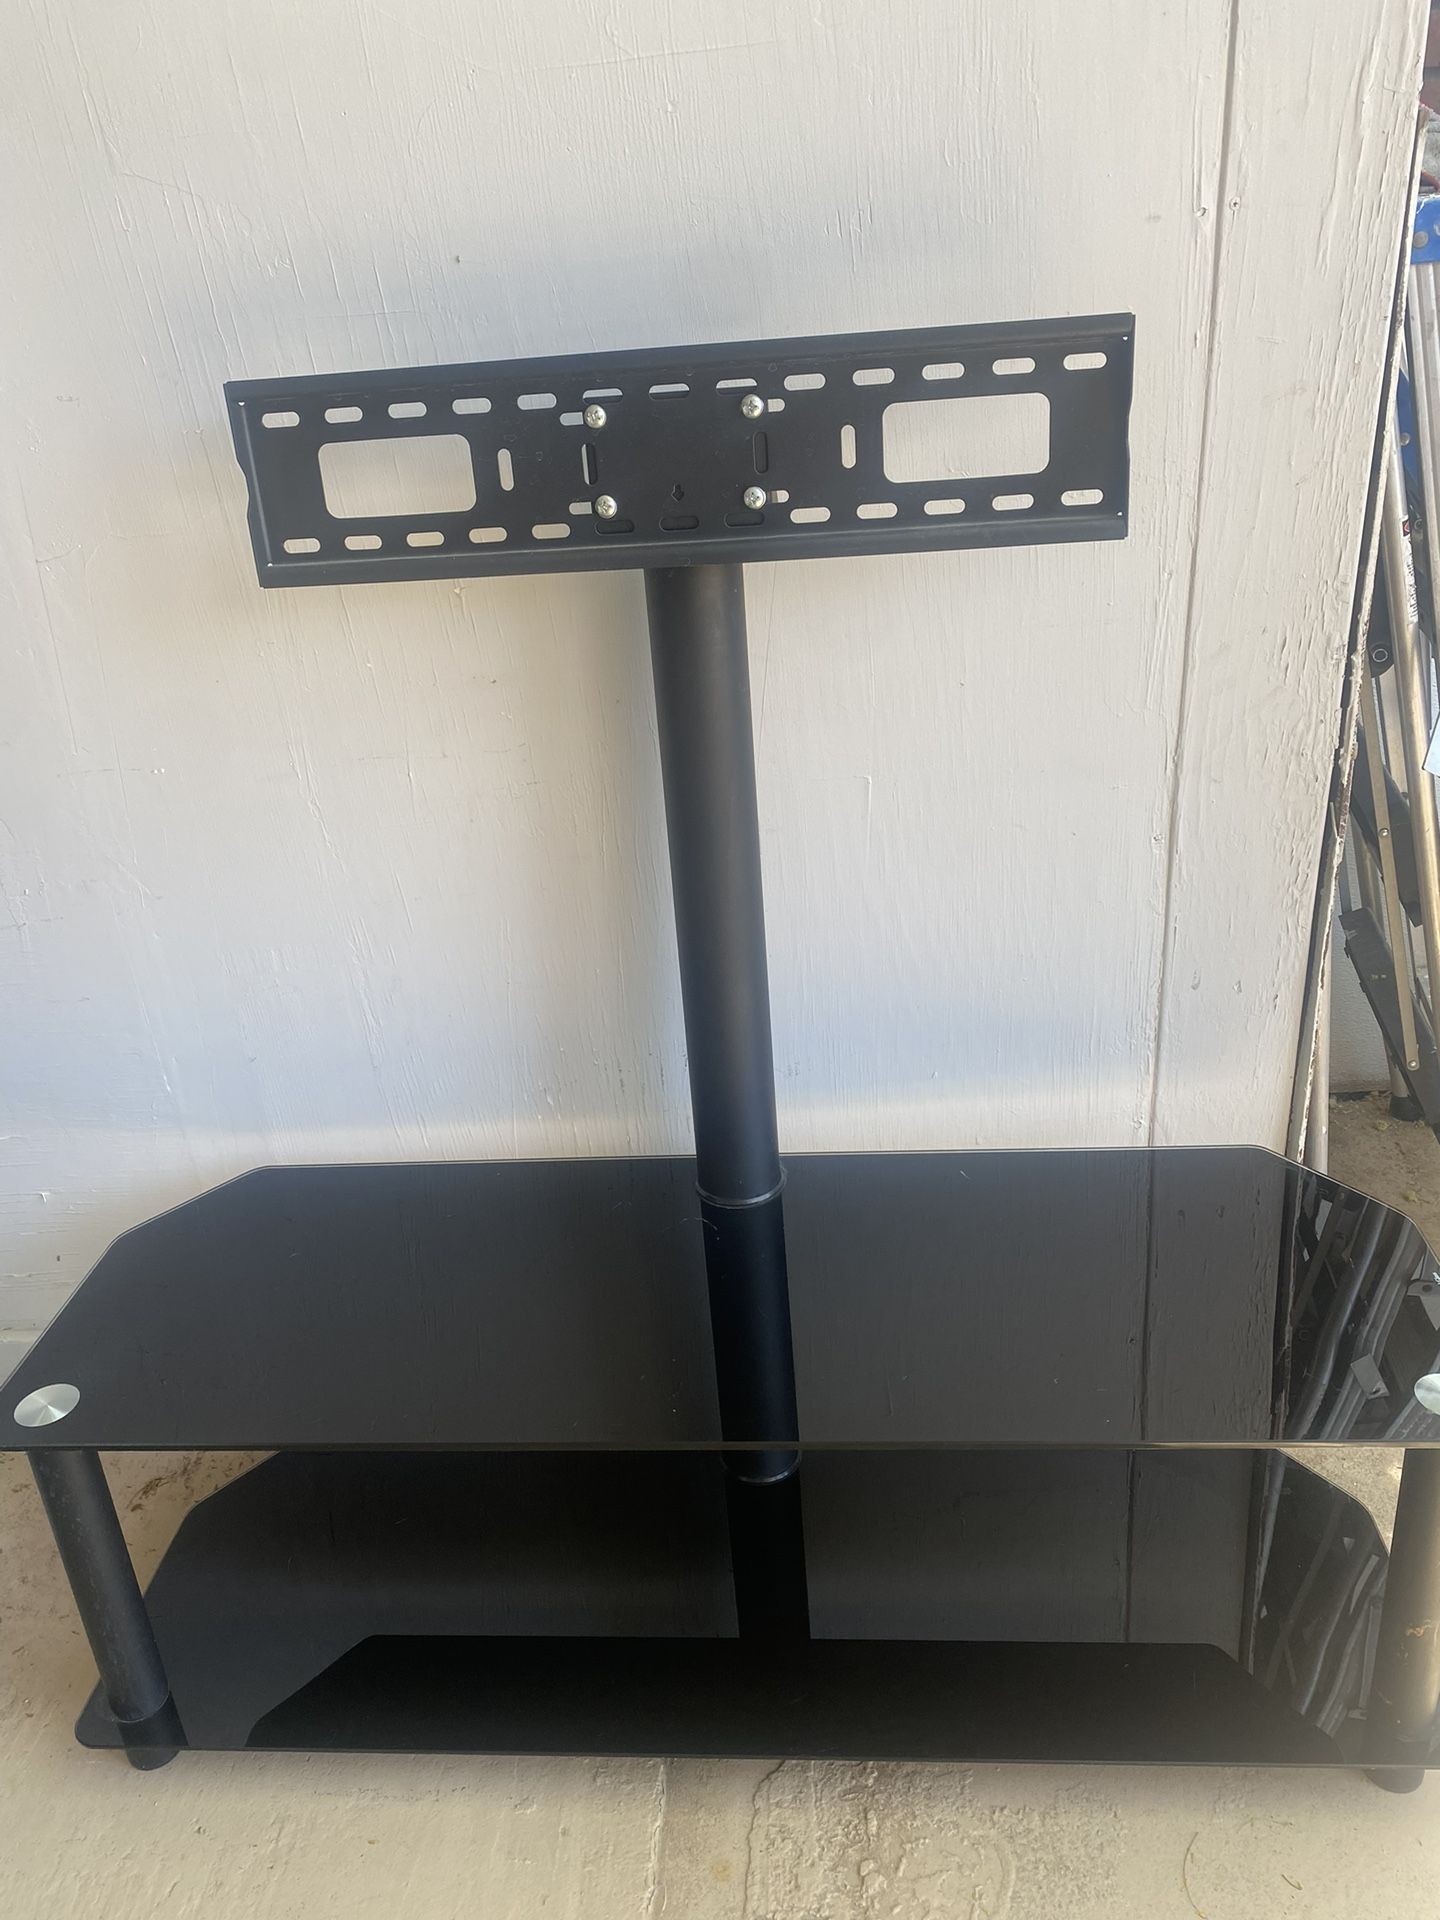 Tv Stand $50 In Excellent Condition 